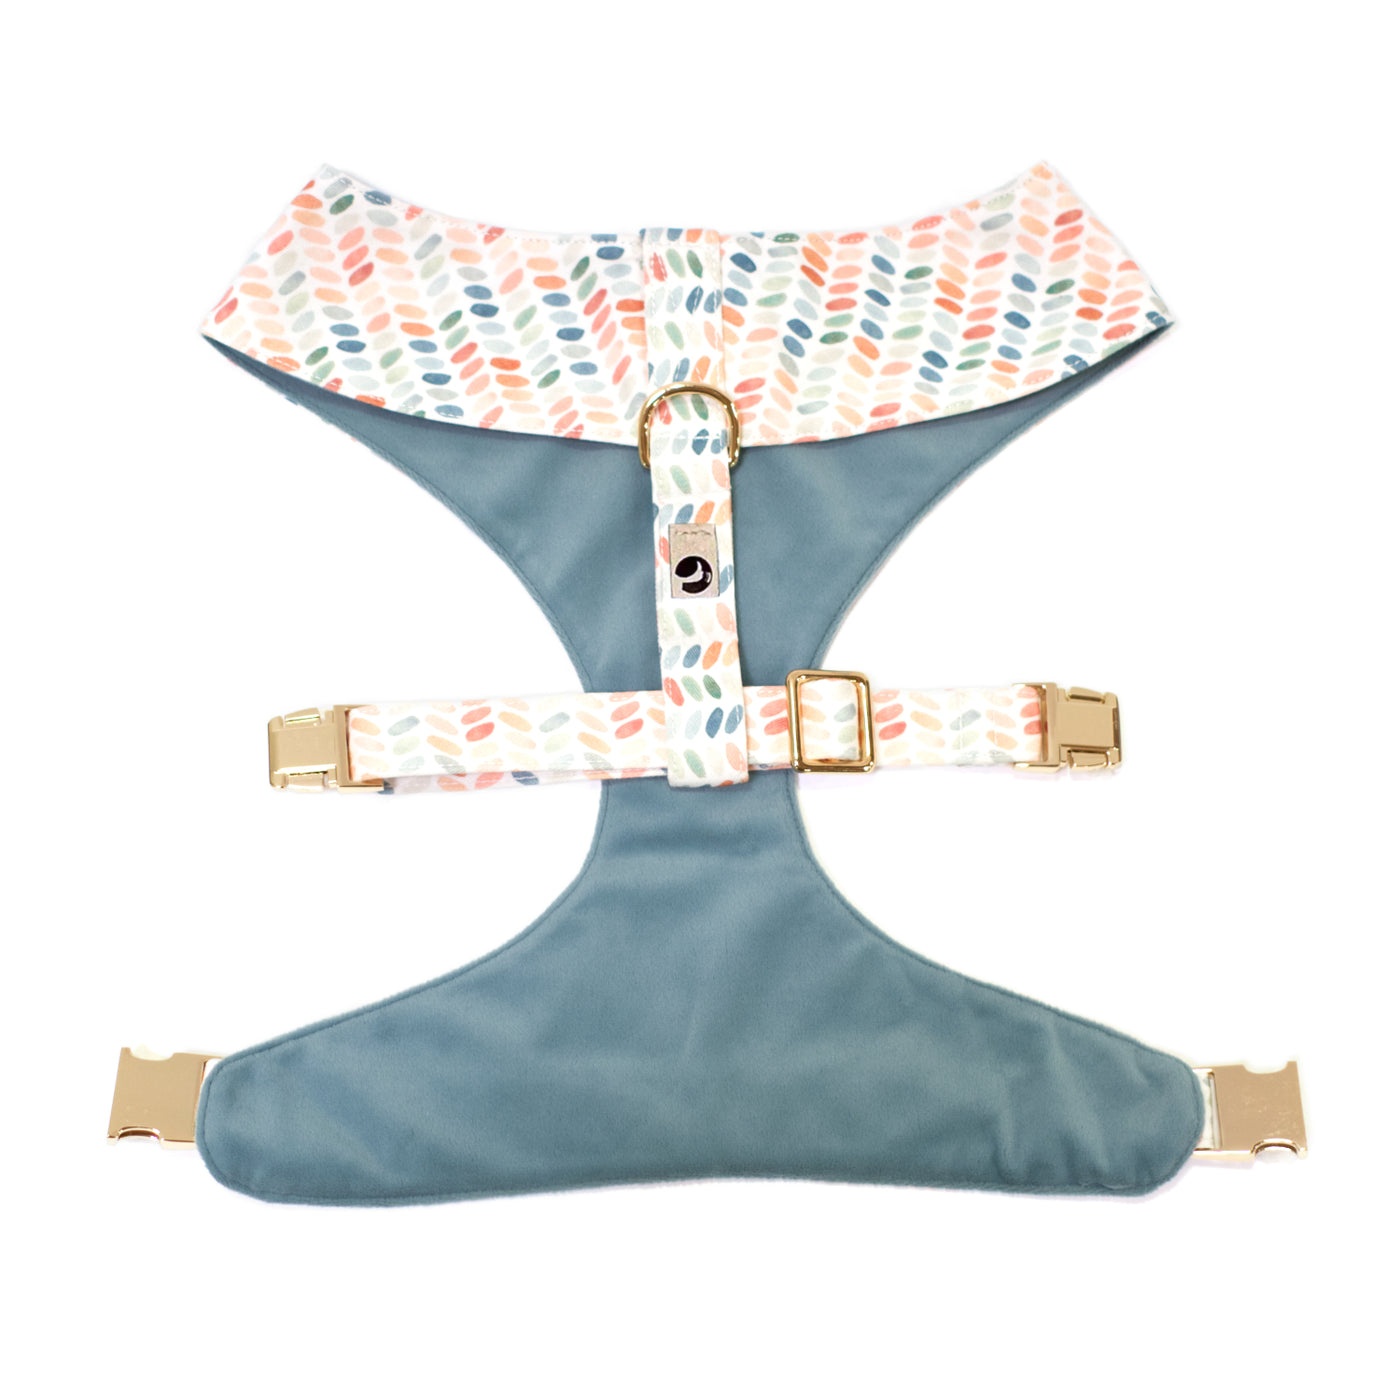 Reversible dog harness in polka dot print show from back/top.